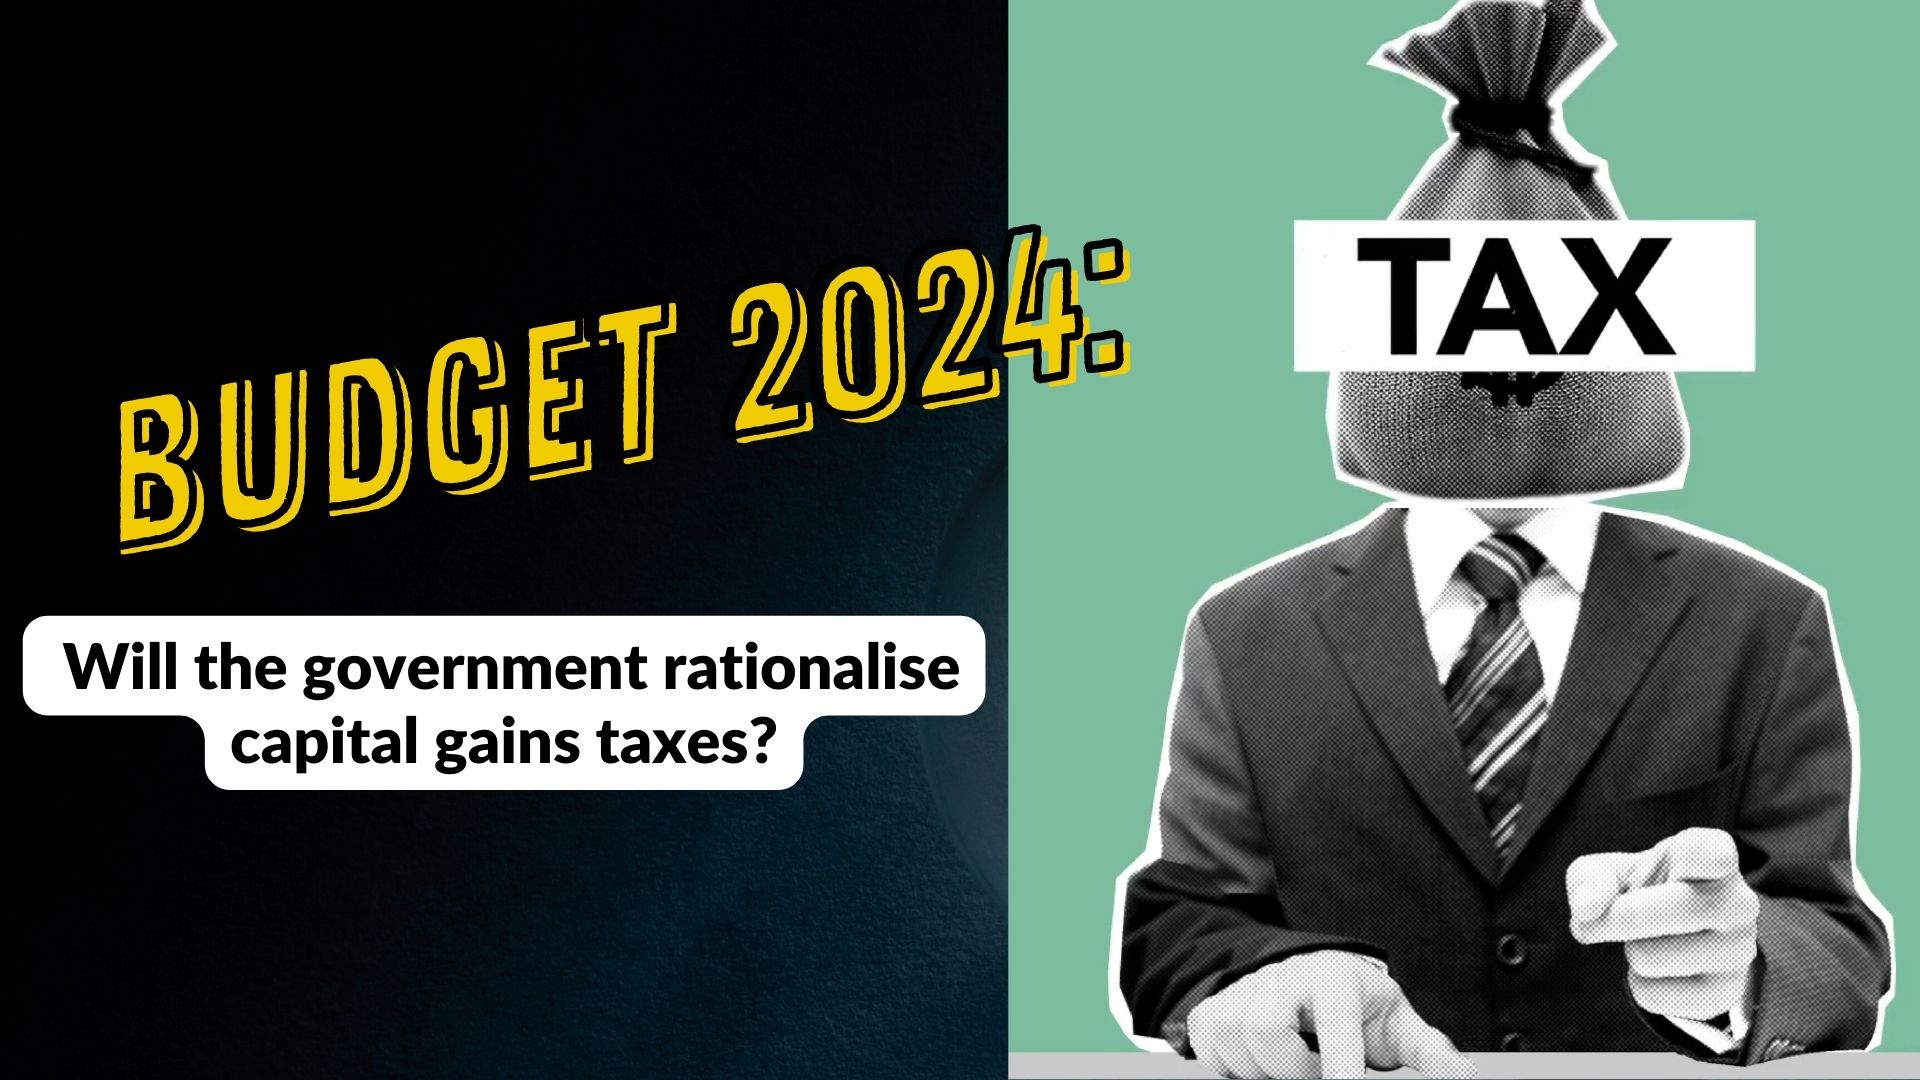 Budget 2024: Potential Changes to Capital Gains Taxes